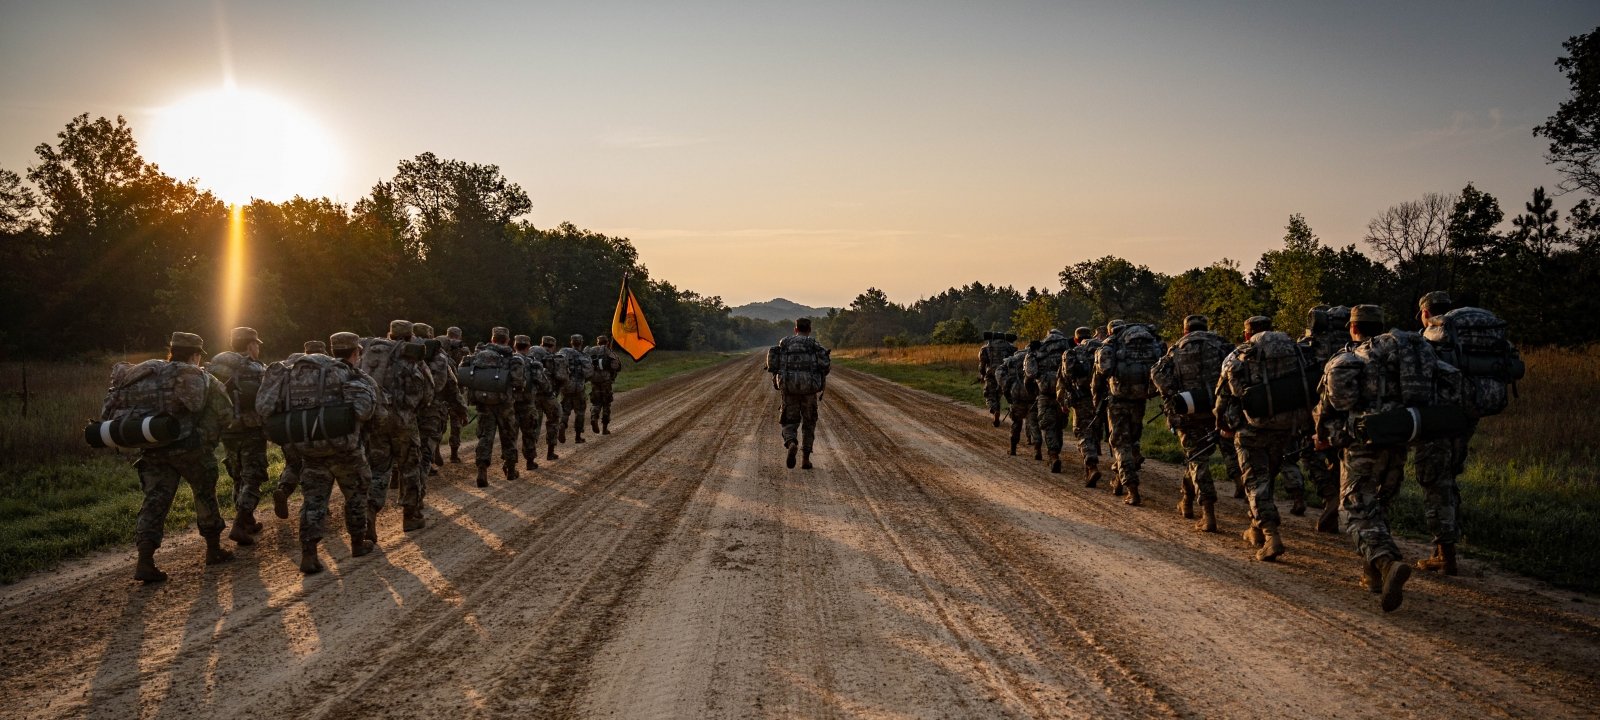 Michigan Techâ€™s 1st Arctic Battalion on a ruck march.